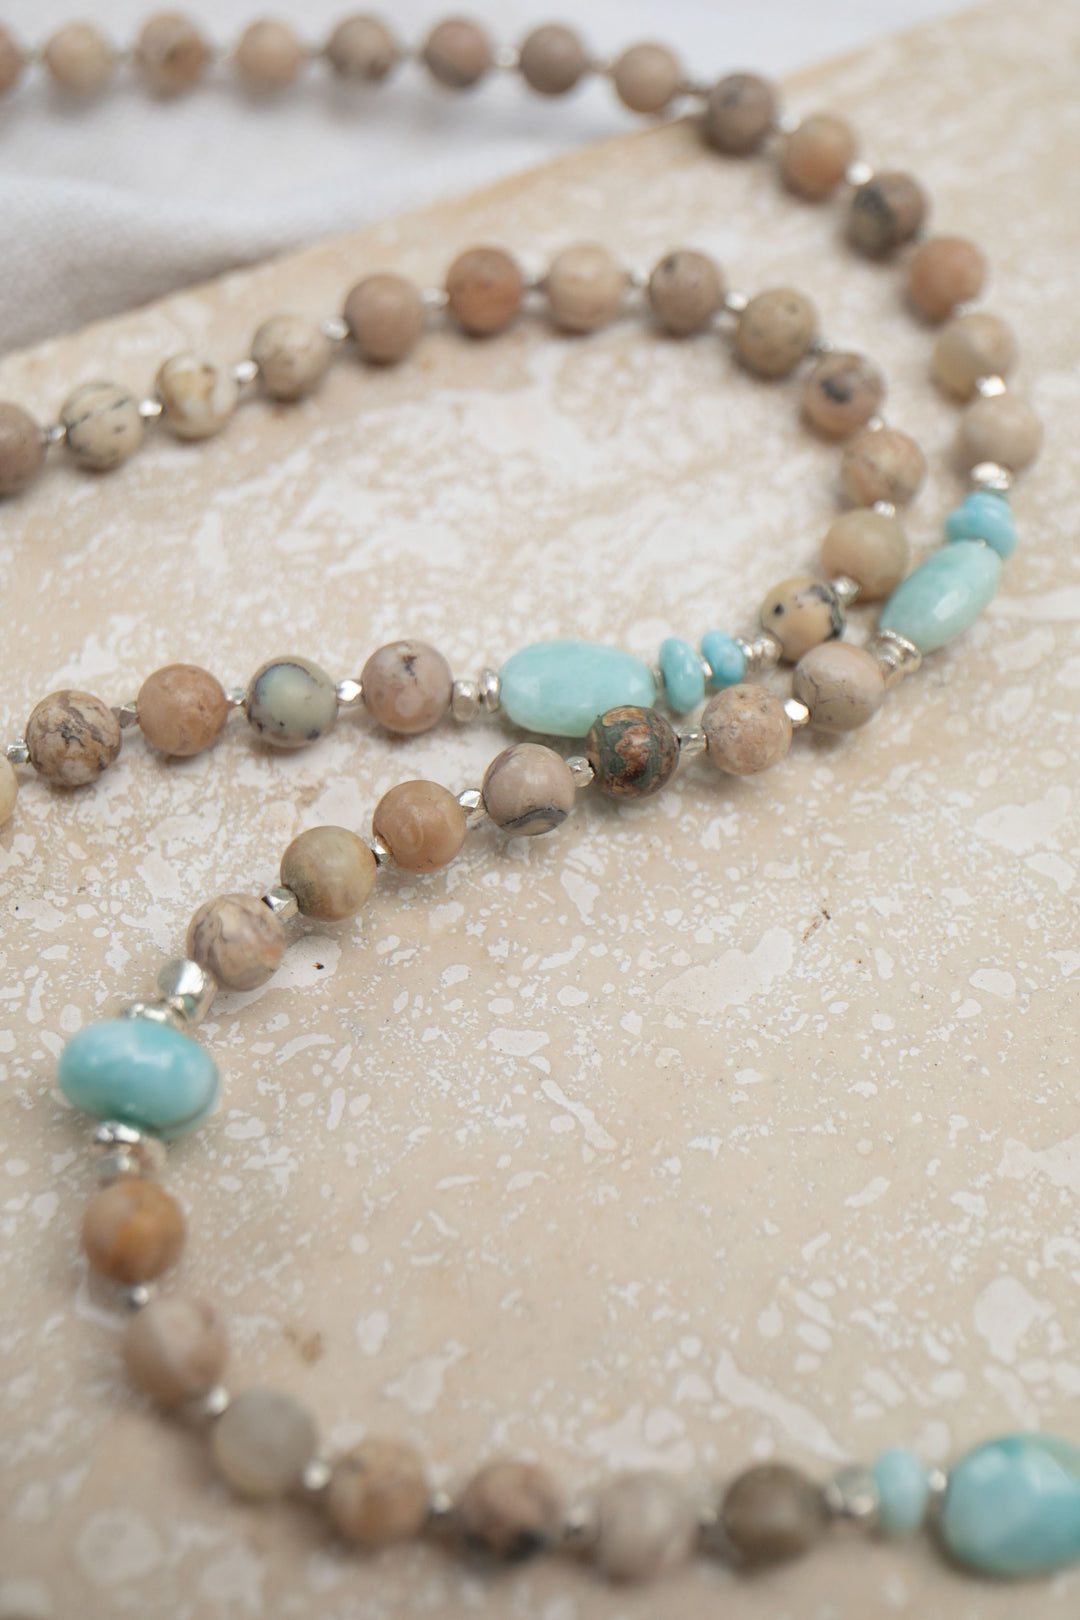 Larimar and Dendritic Agate Handmade Necklace with Thai Hill Tribe Silver Beads and Larimar Pendant